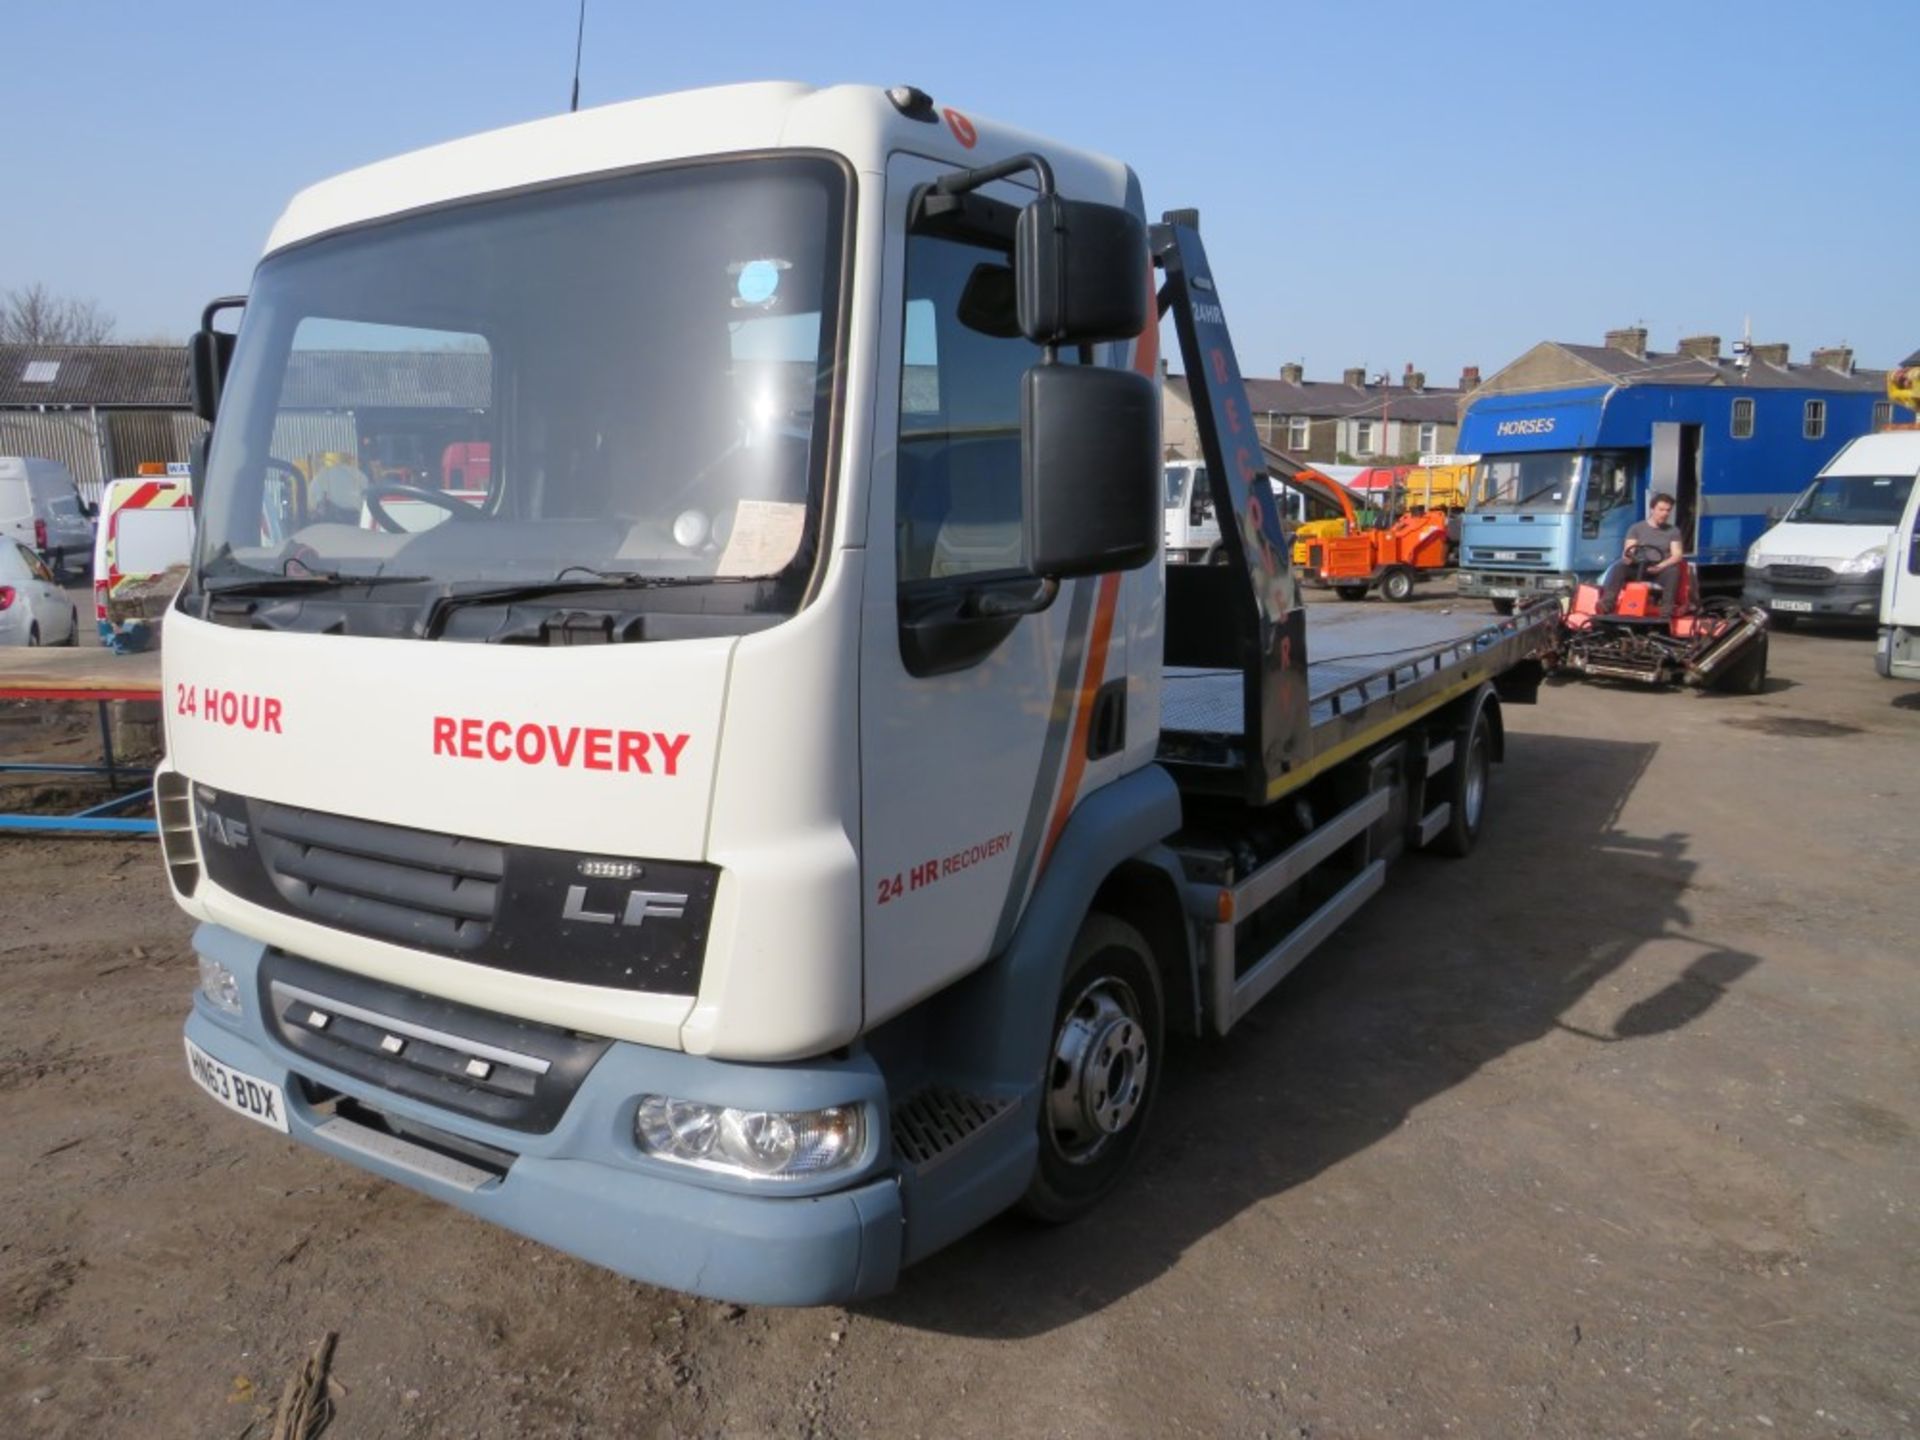 DAF 7.5t RECOVERY VEHICLE, 1ST REG 12/13, 179276M, V5 HERE, 3 FORMER KEEPERS [NO VAT]